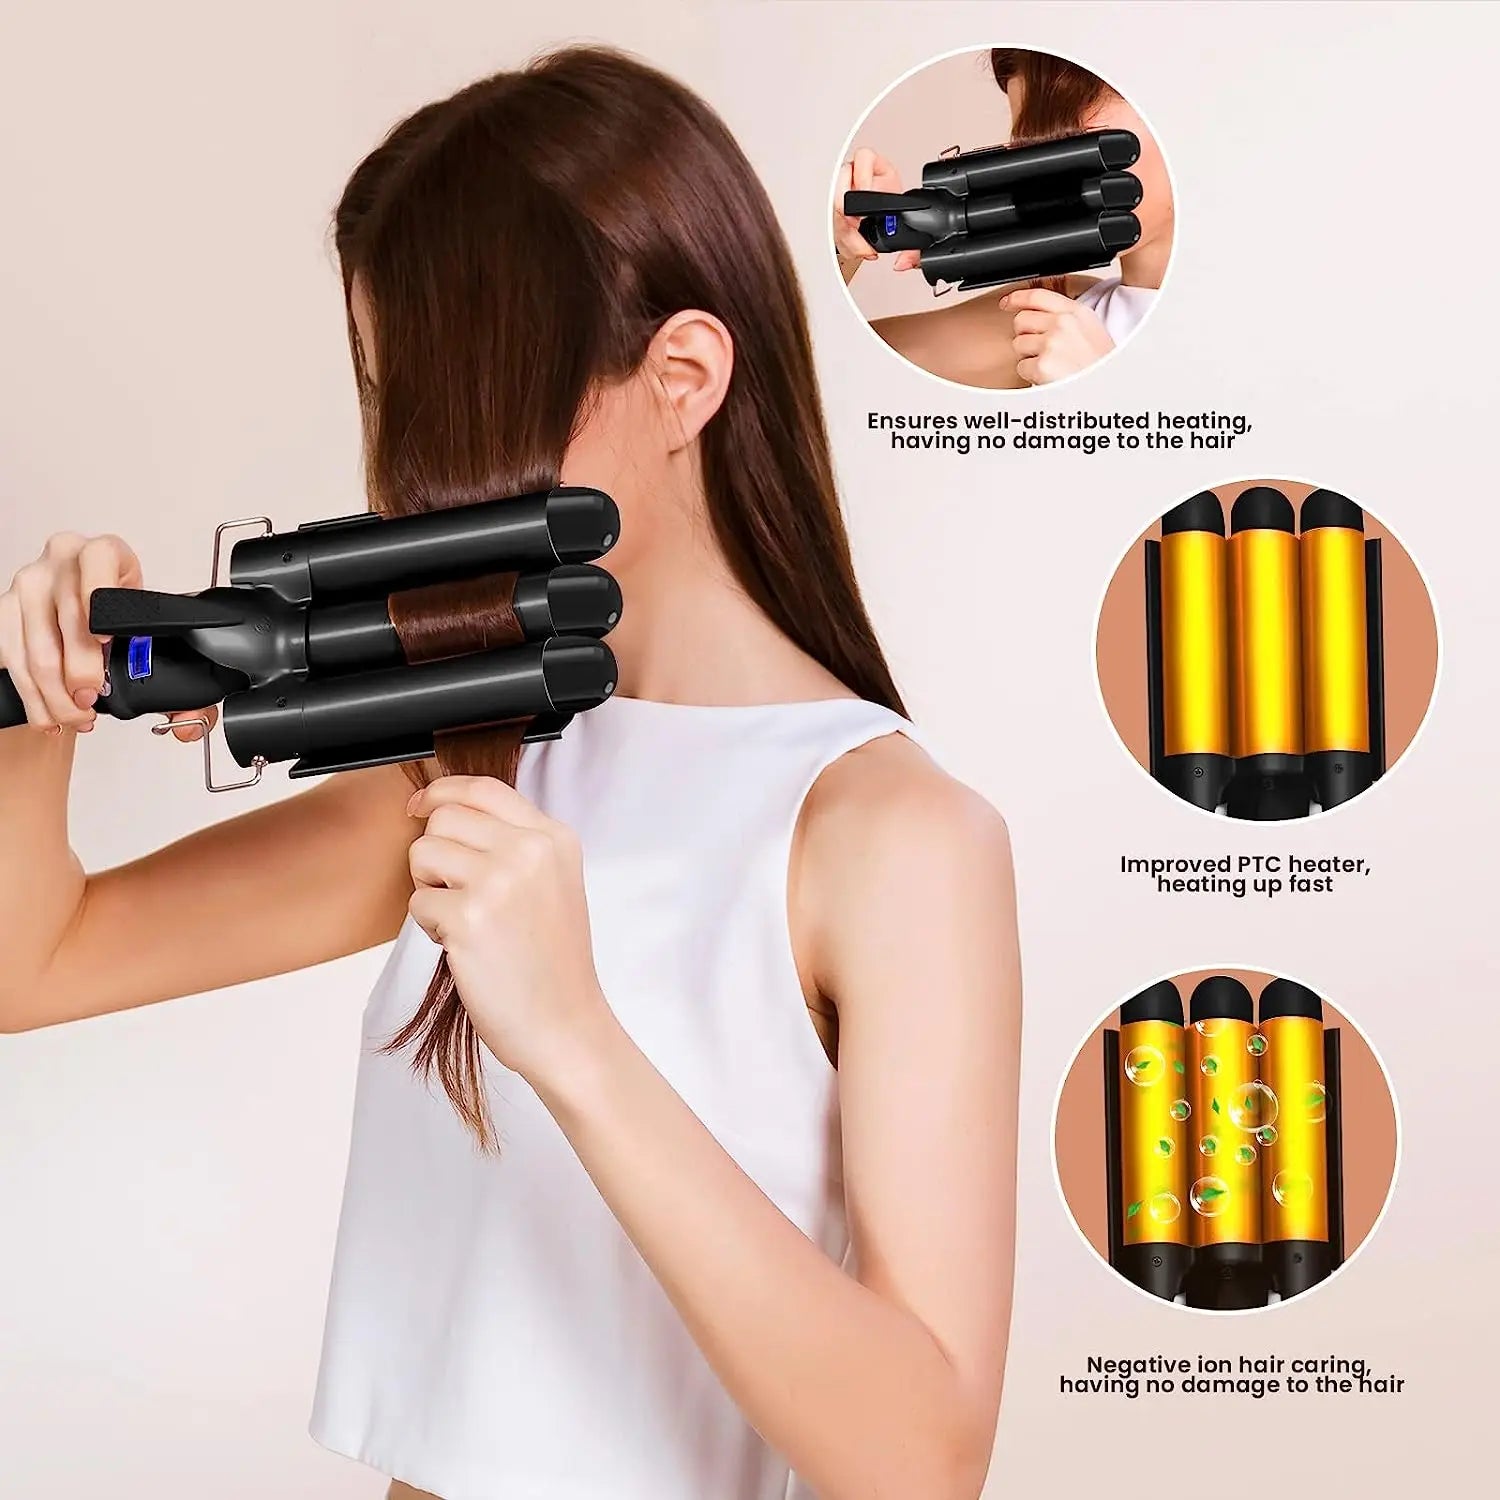 Hair Waver Pro: Triple Barrel Waves That Last, Style That Persists